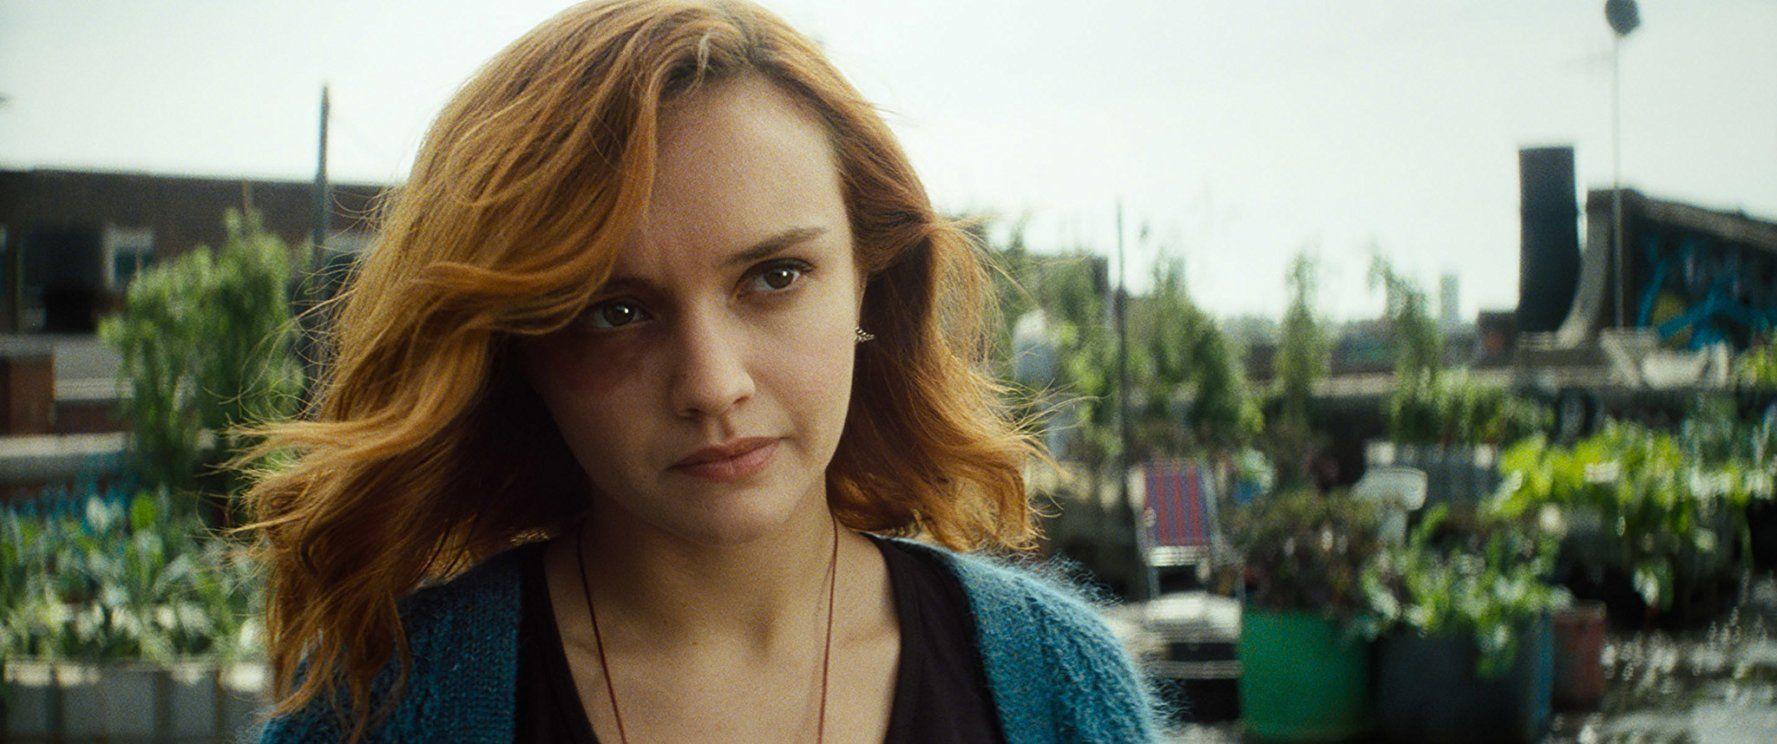 Olivia Cooke in Ready Player One (2018). Faces, 2018. Ready Player